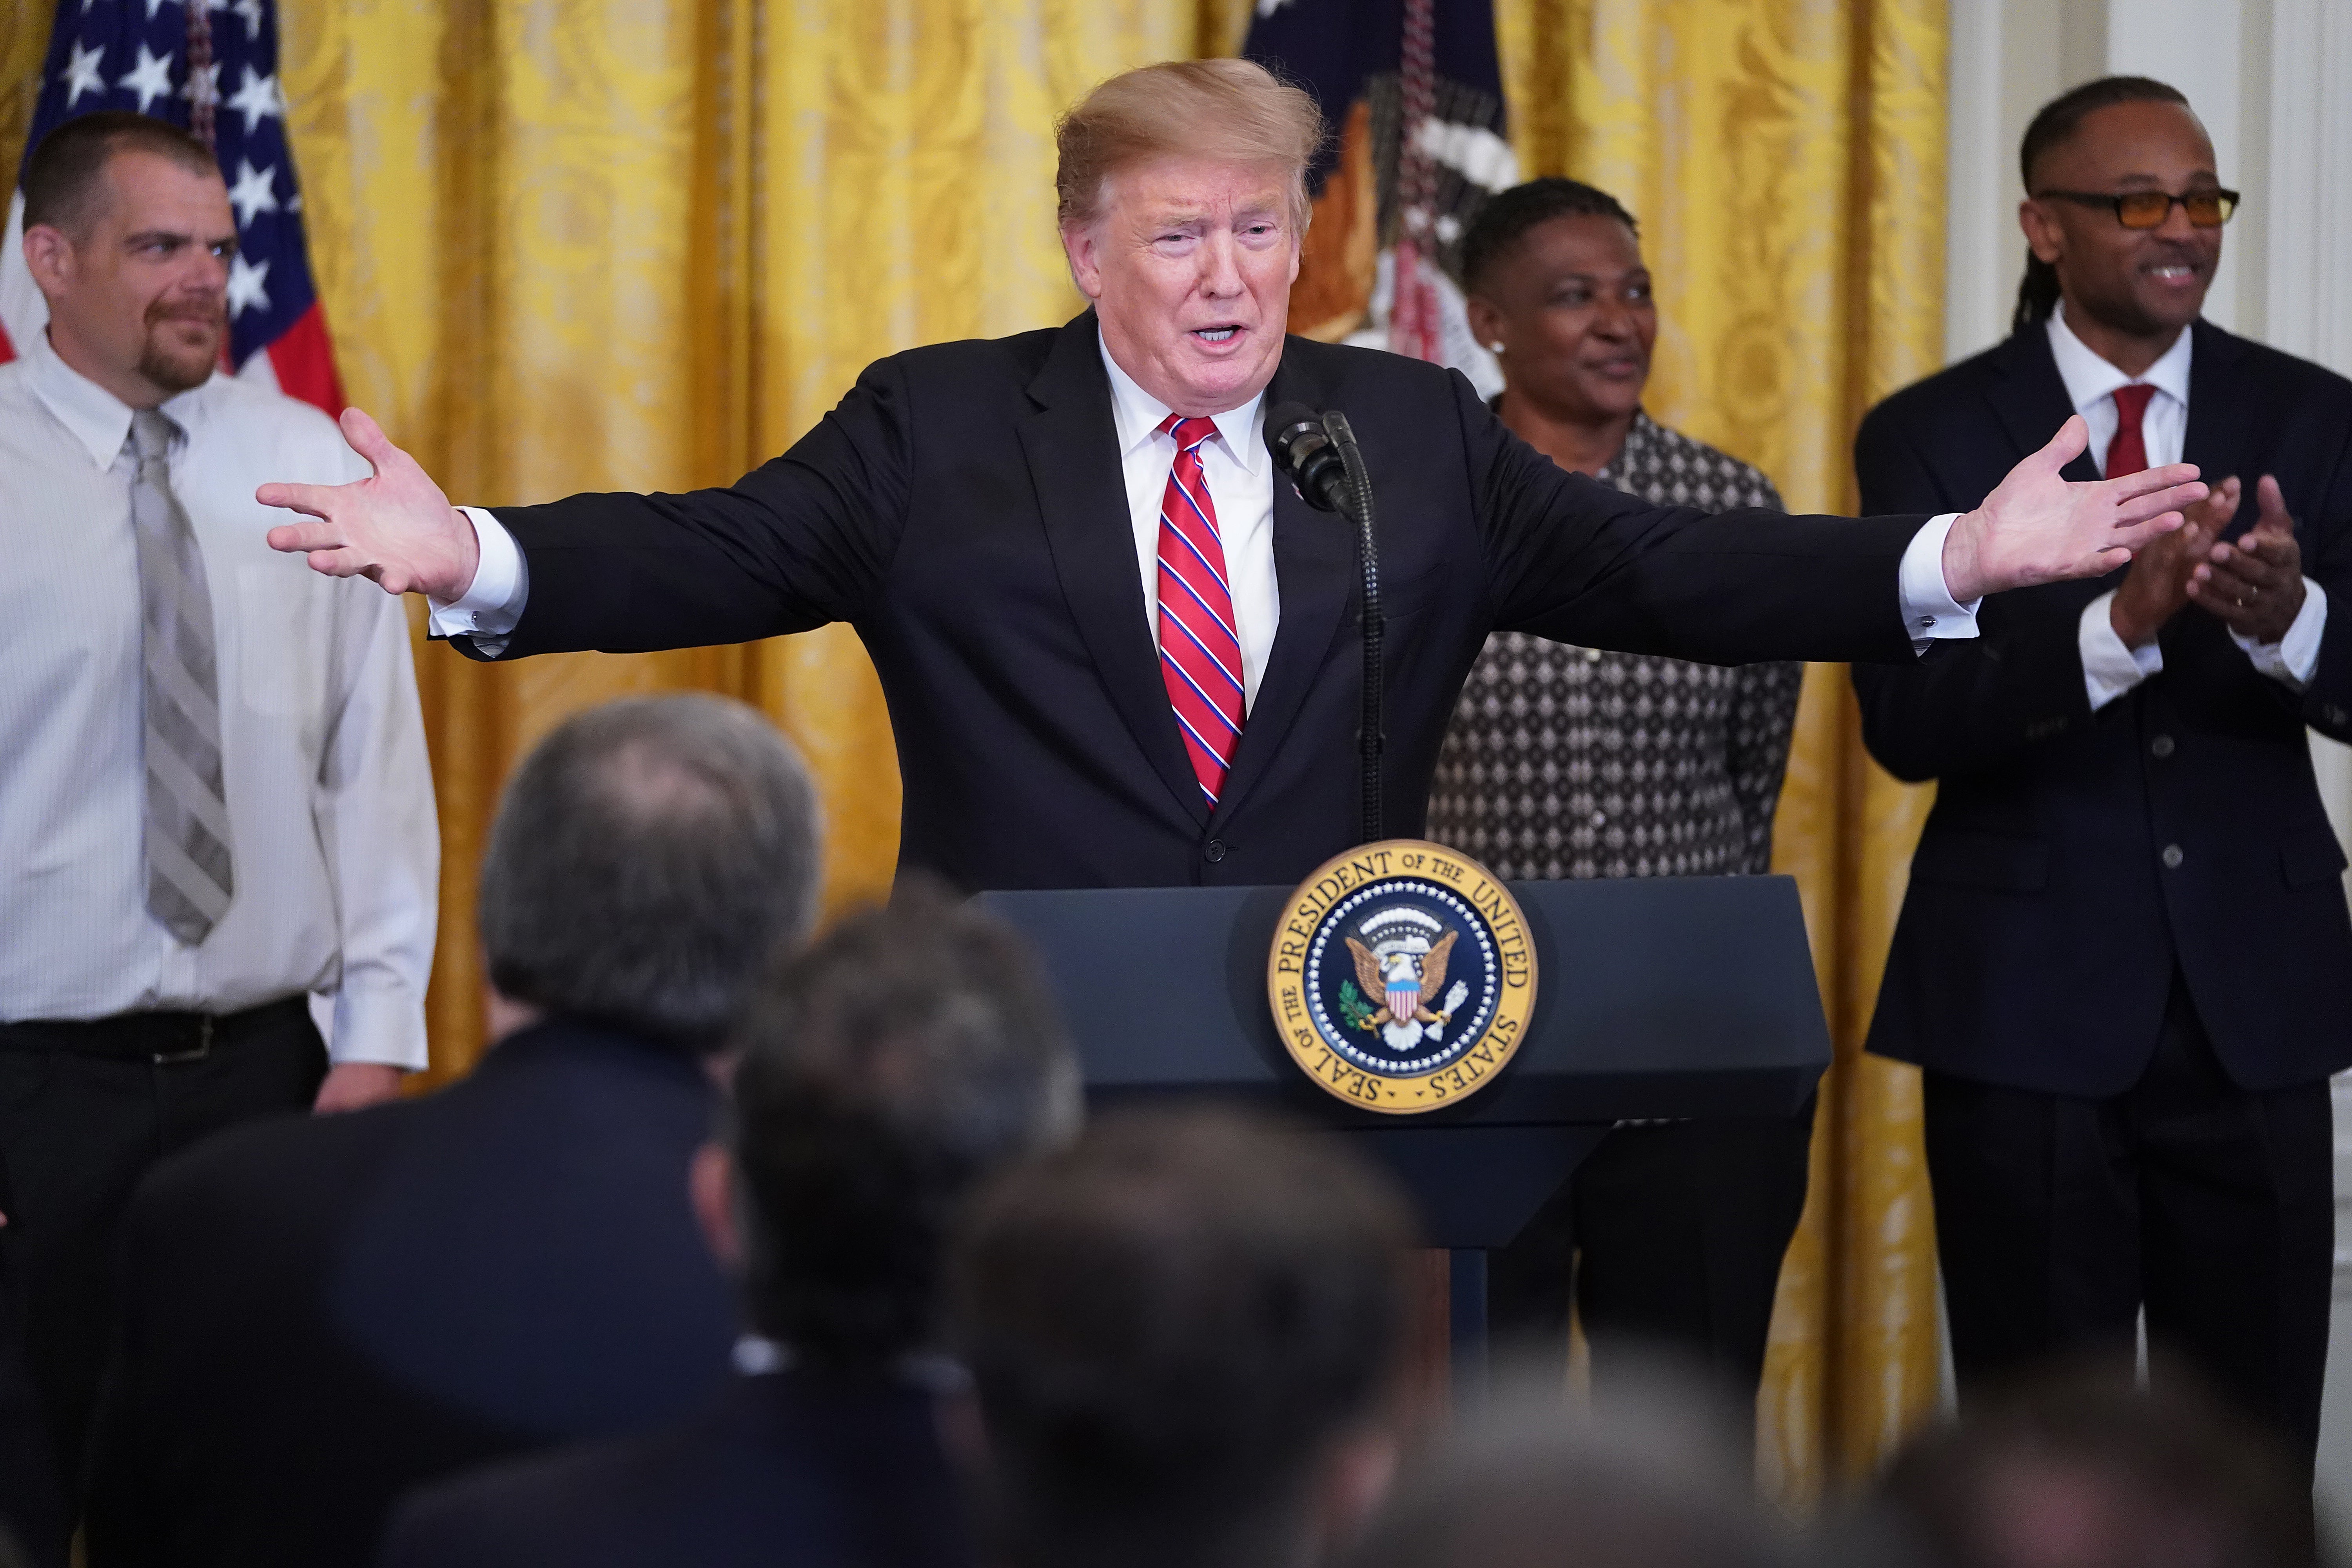 Donald Trump celebrates passage of the First Step Act at the White House with formerly incarcerated people on 1 April, 2019.